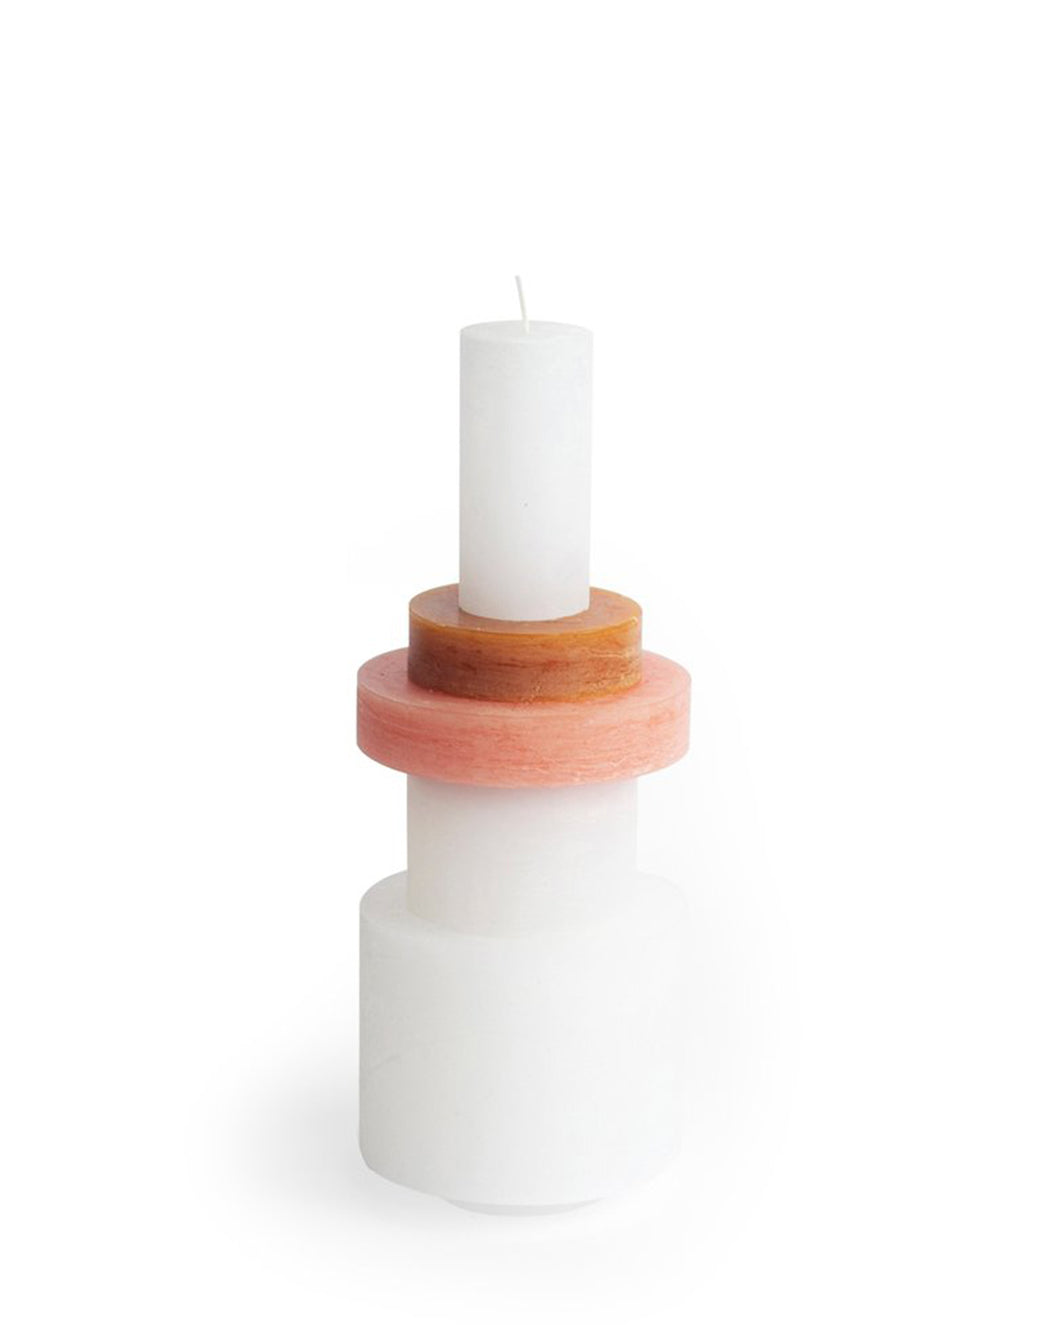 Candl Stack - Stack 04 - White Candle